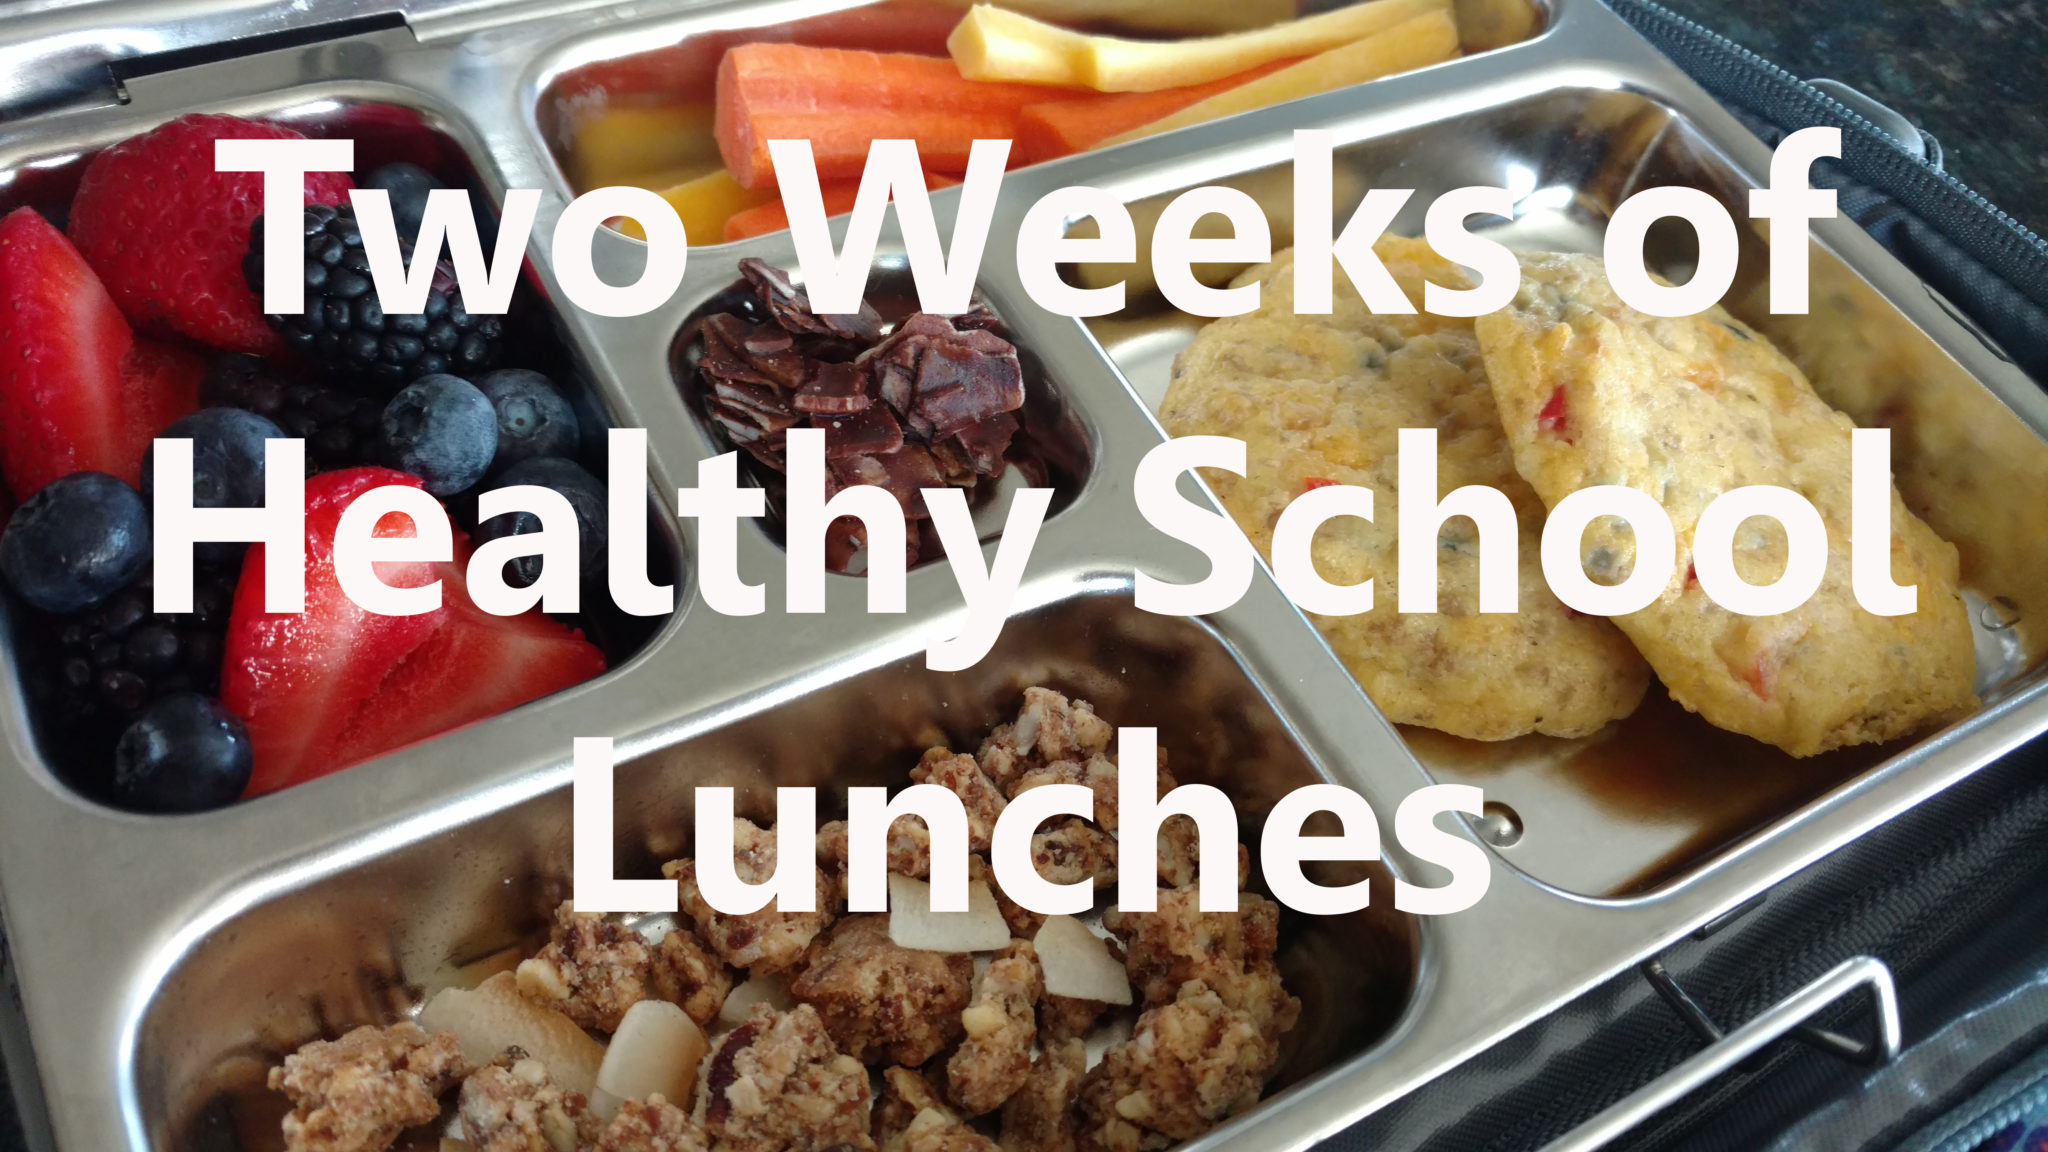 http://www.cisforcoconut.com/wp-content/uploads/2017/09/Healthy-School-Lunches-1.jpg